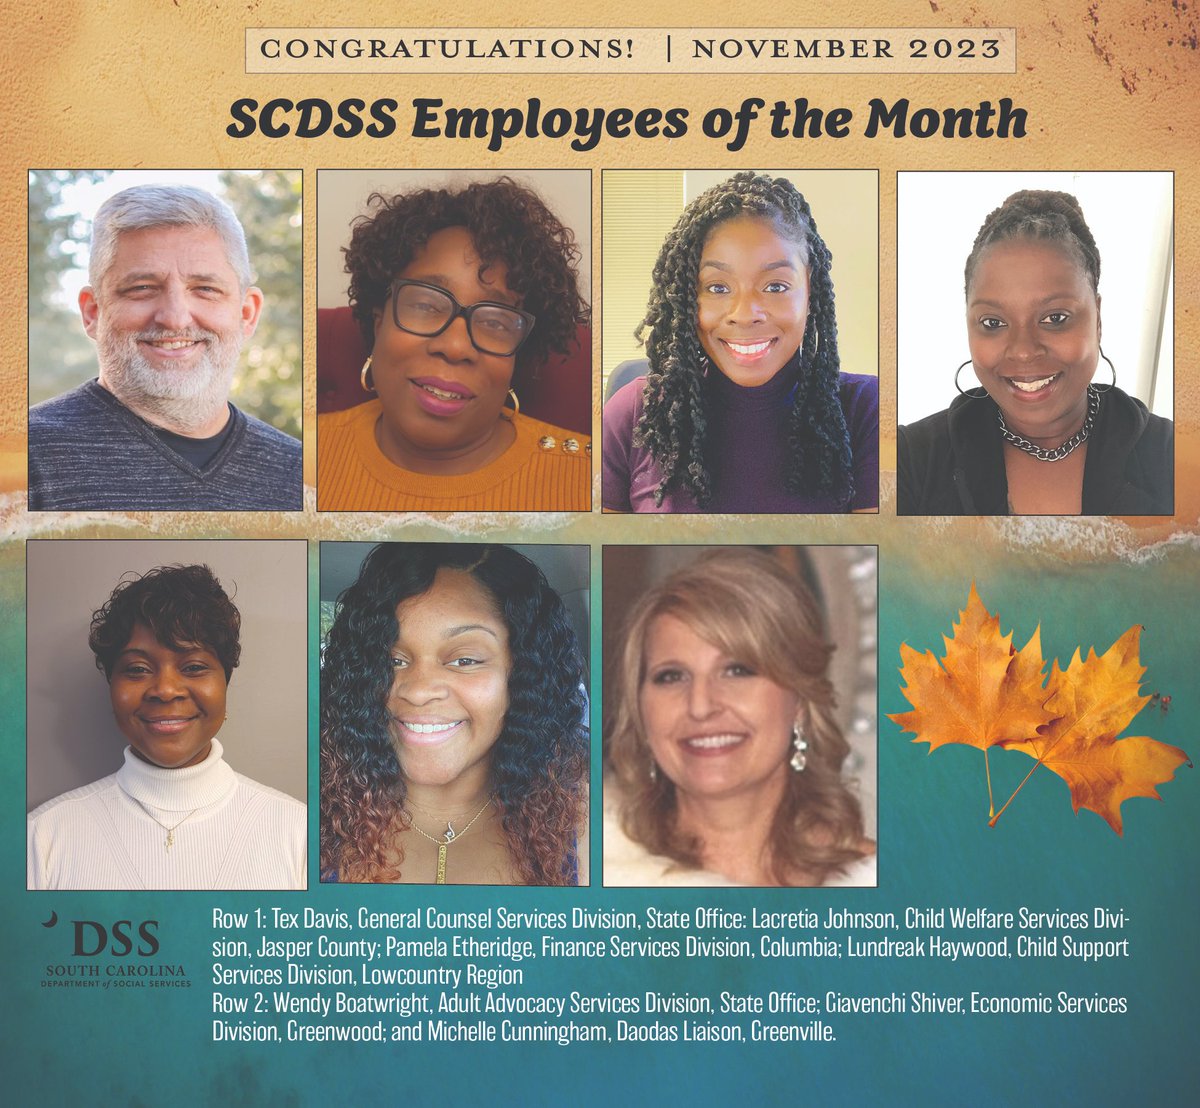 Today, DSS State Director @hardyleach recognized November Employees of the Month. He acknowledged each employee and thanked them for their #competencecouragecompassion in serving the citizens of SC.
#DSSserves2023
#StrengtheningFamilies
#BetterTogether